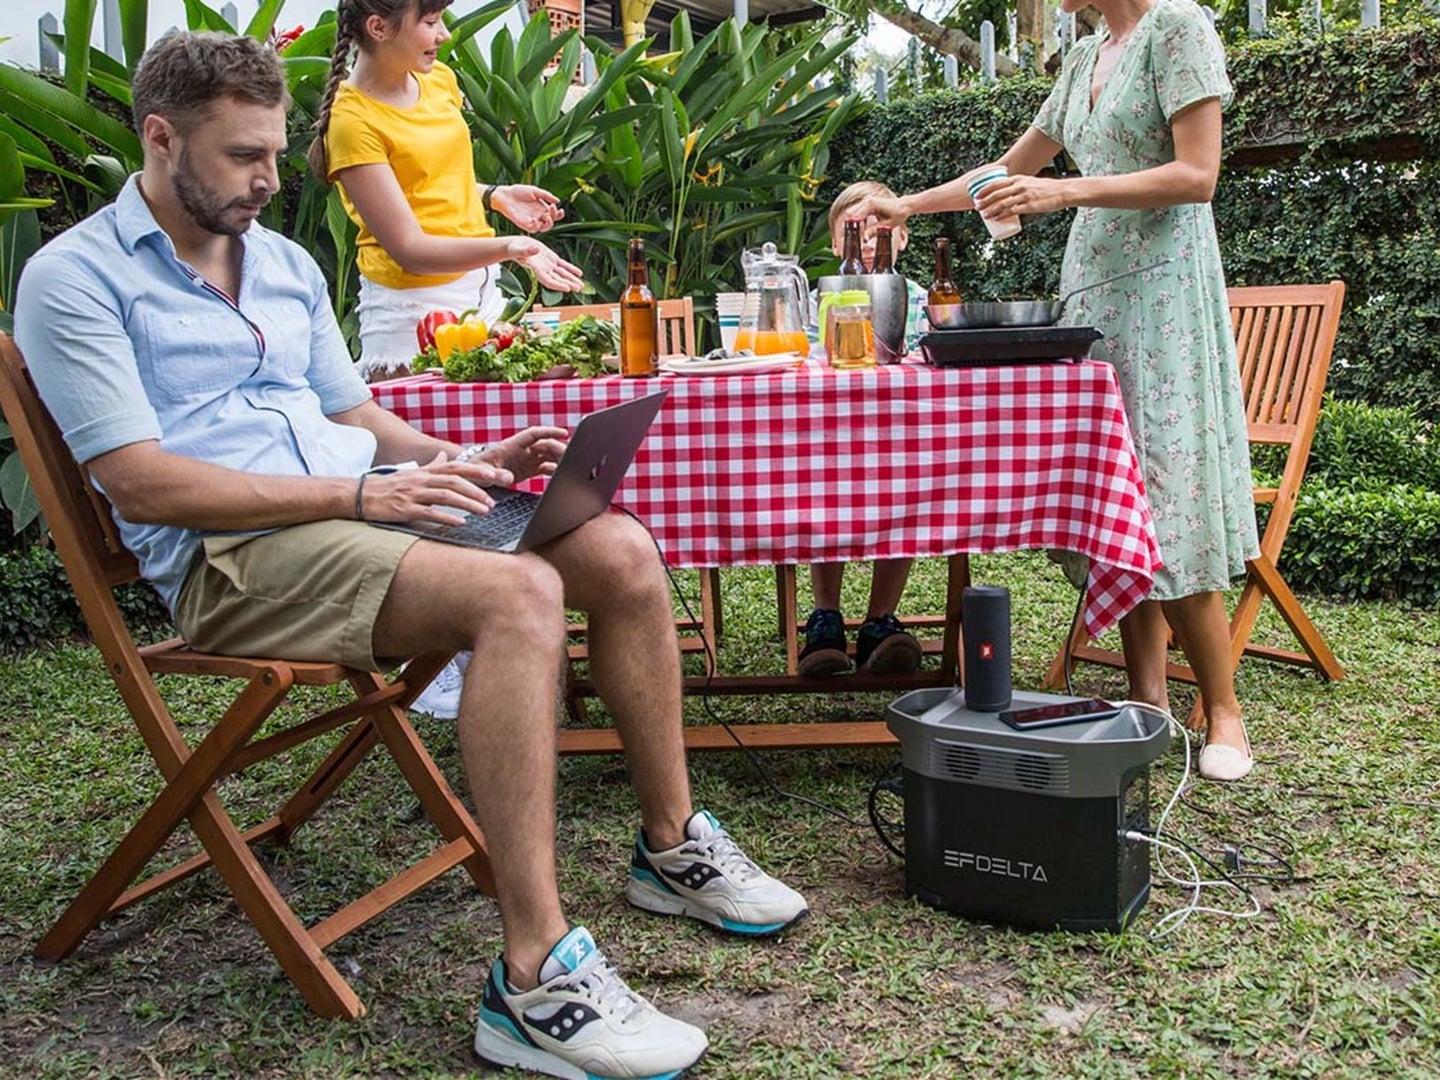 A person using their laptop powered by an electric generator during a picnic